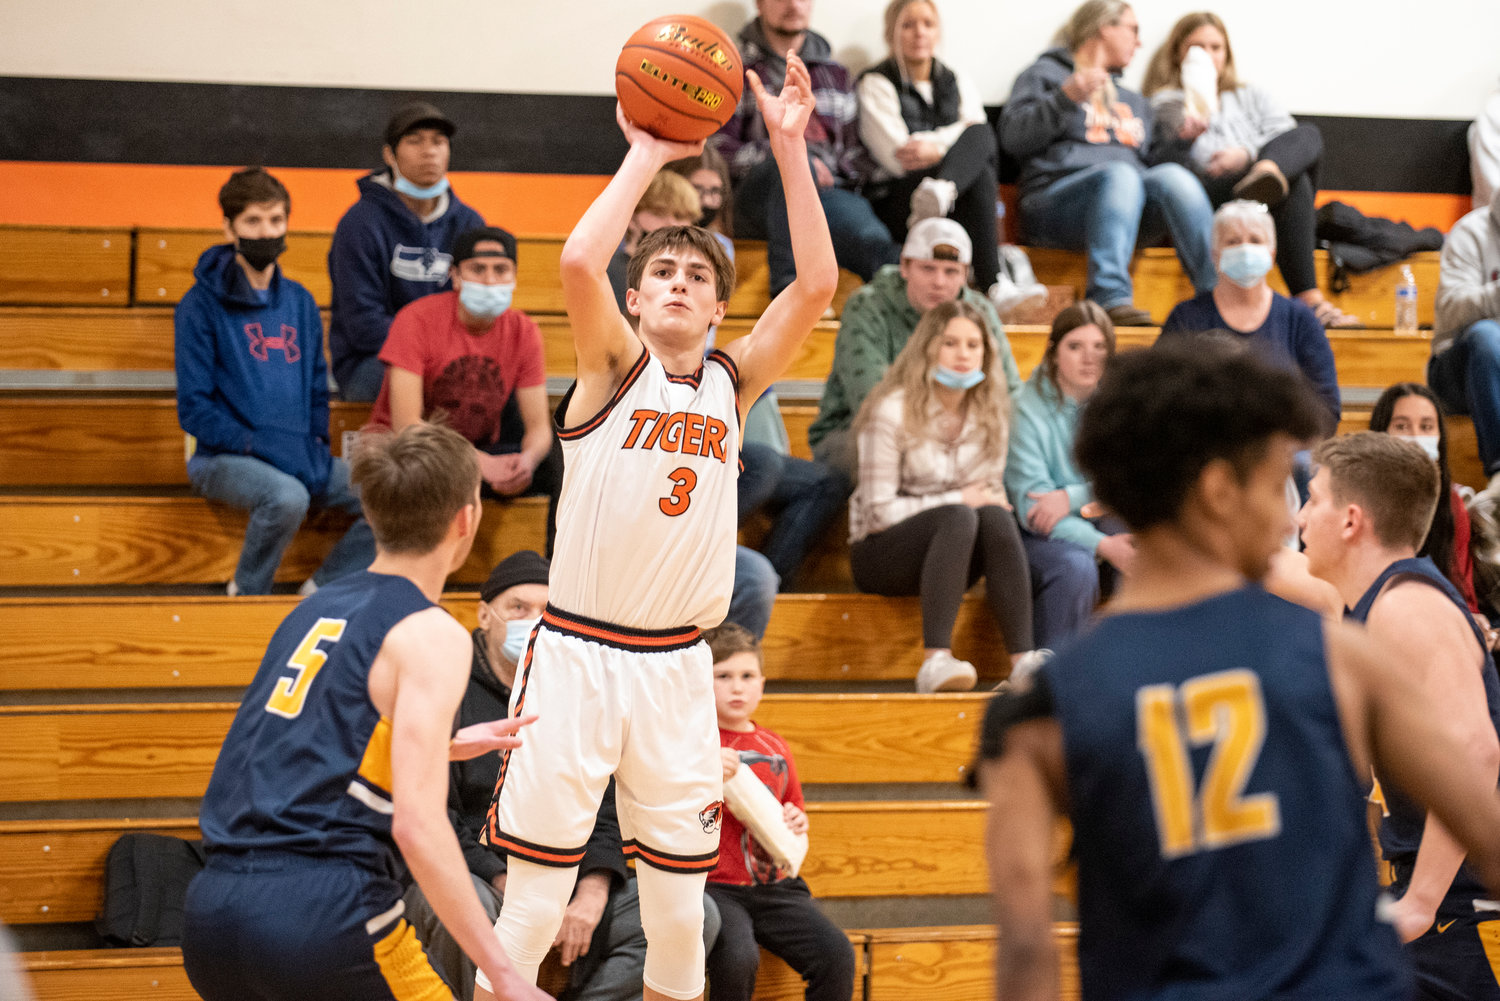 Napavine's James Grose (3) shoots a 3-pointer during the TIgers' season opener at home against Aberdeen on Dec. 11.